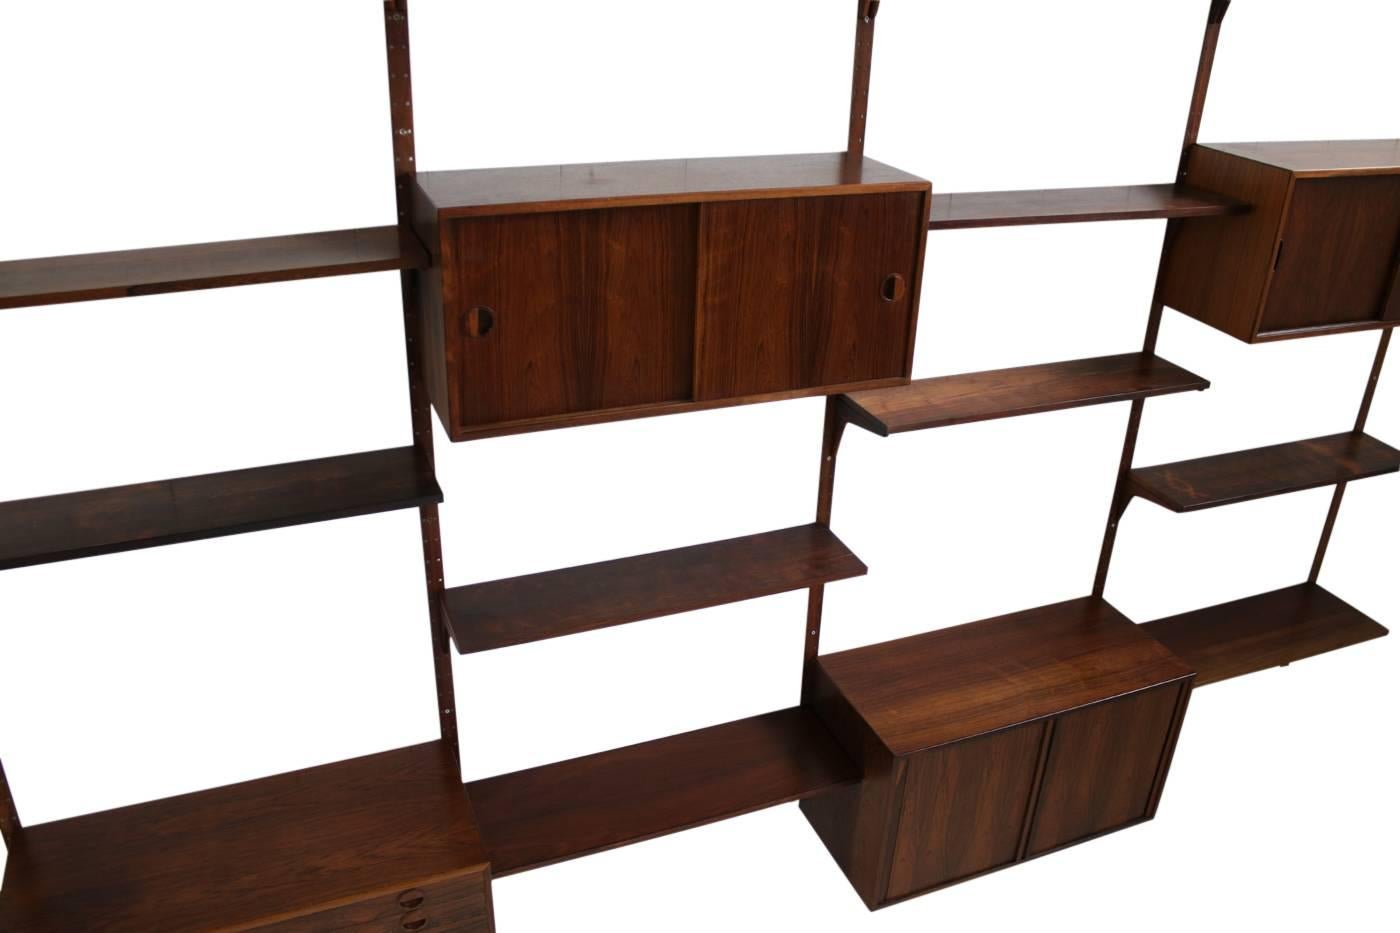 Mid-20th Century Large Danish 1960s Rosewood Wall Unit by Rud Thygesen for HG Møbler Shelf